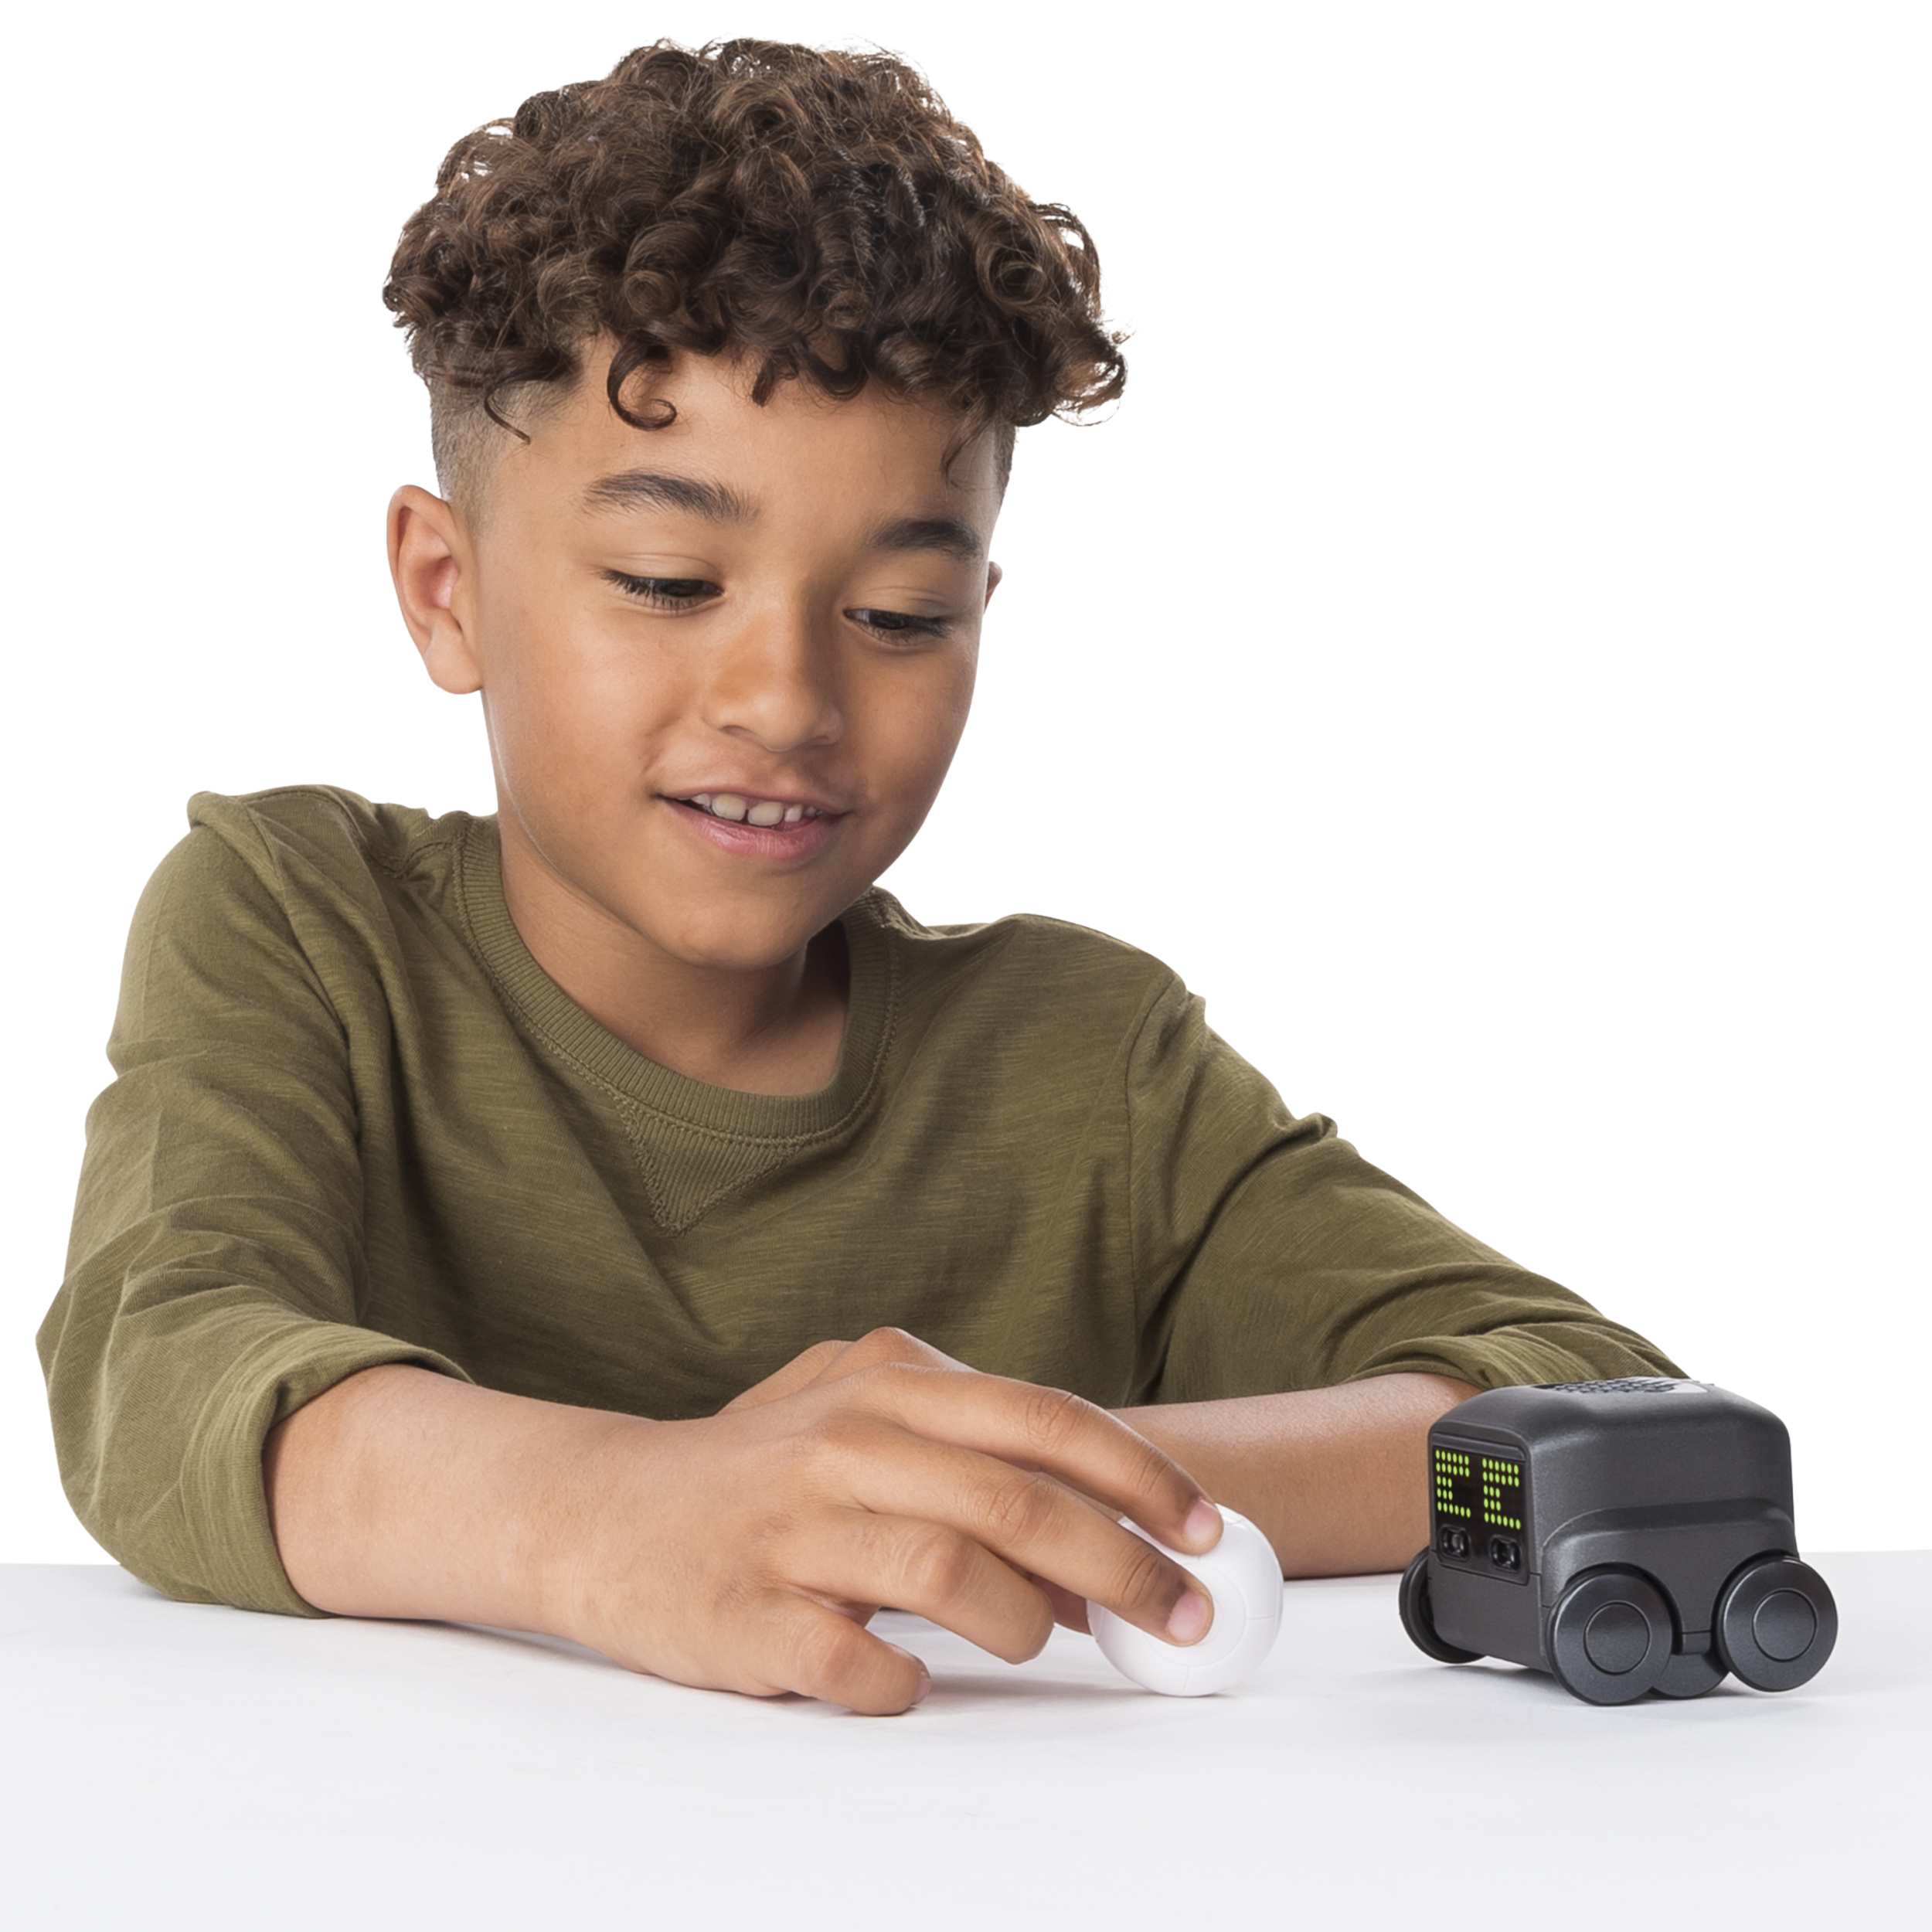 Boxer Interactive A.I. Robot Toy (Black) with Personality and Emotions, for Ages 6 and Up - image 3 of 8